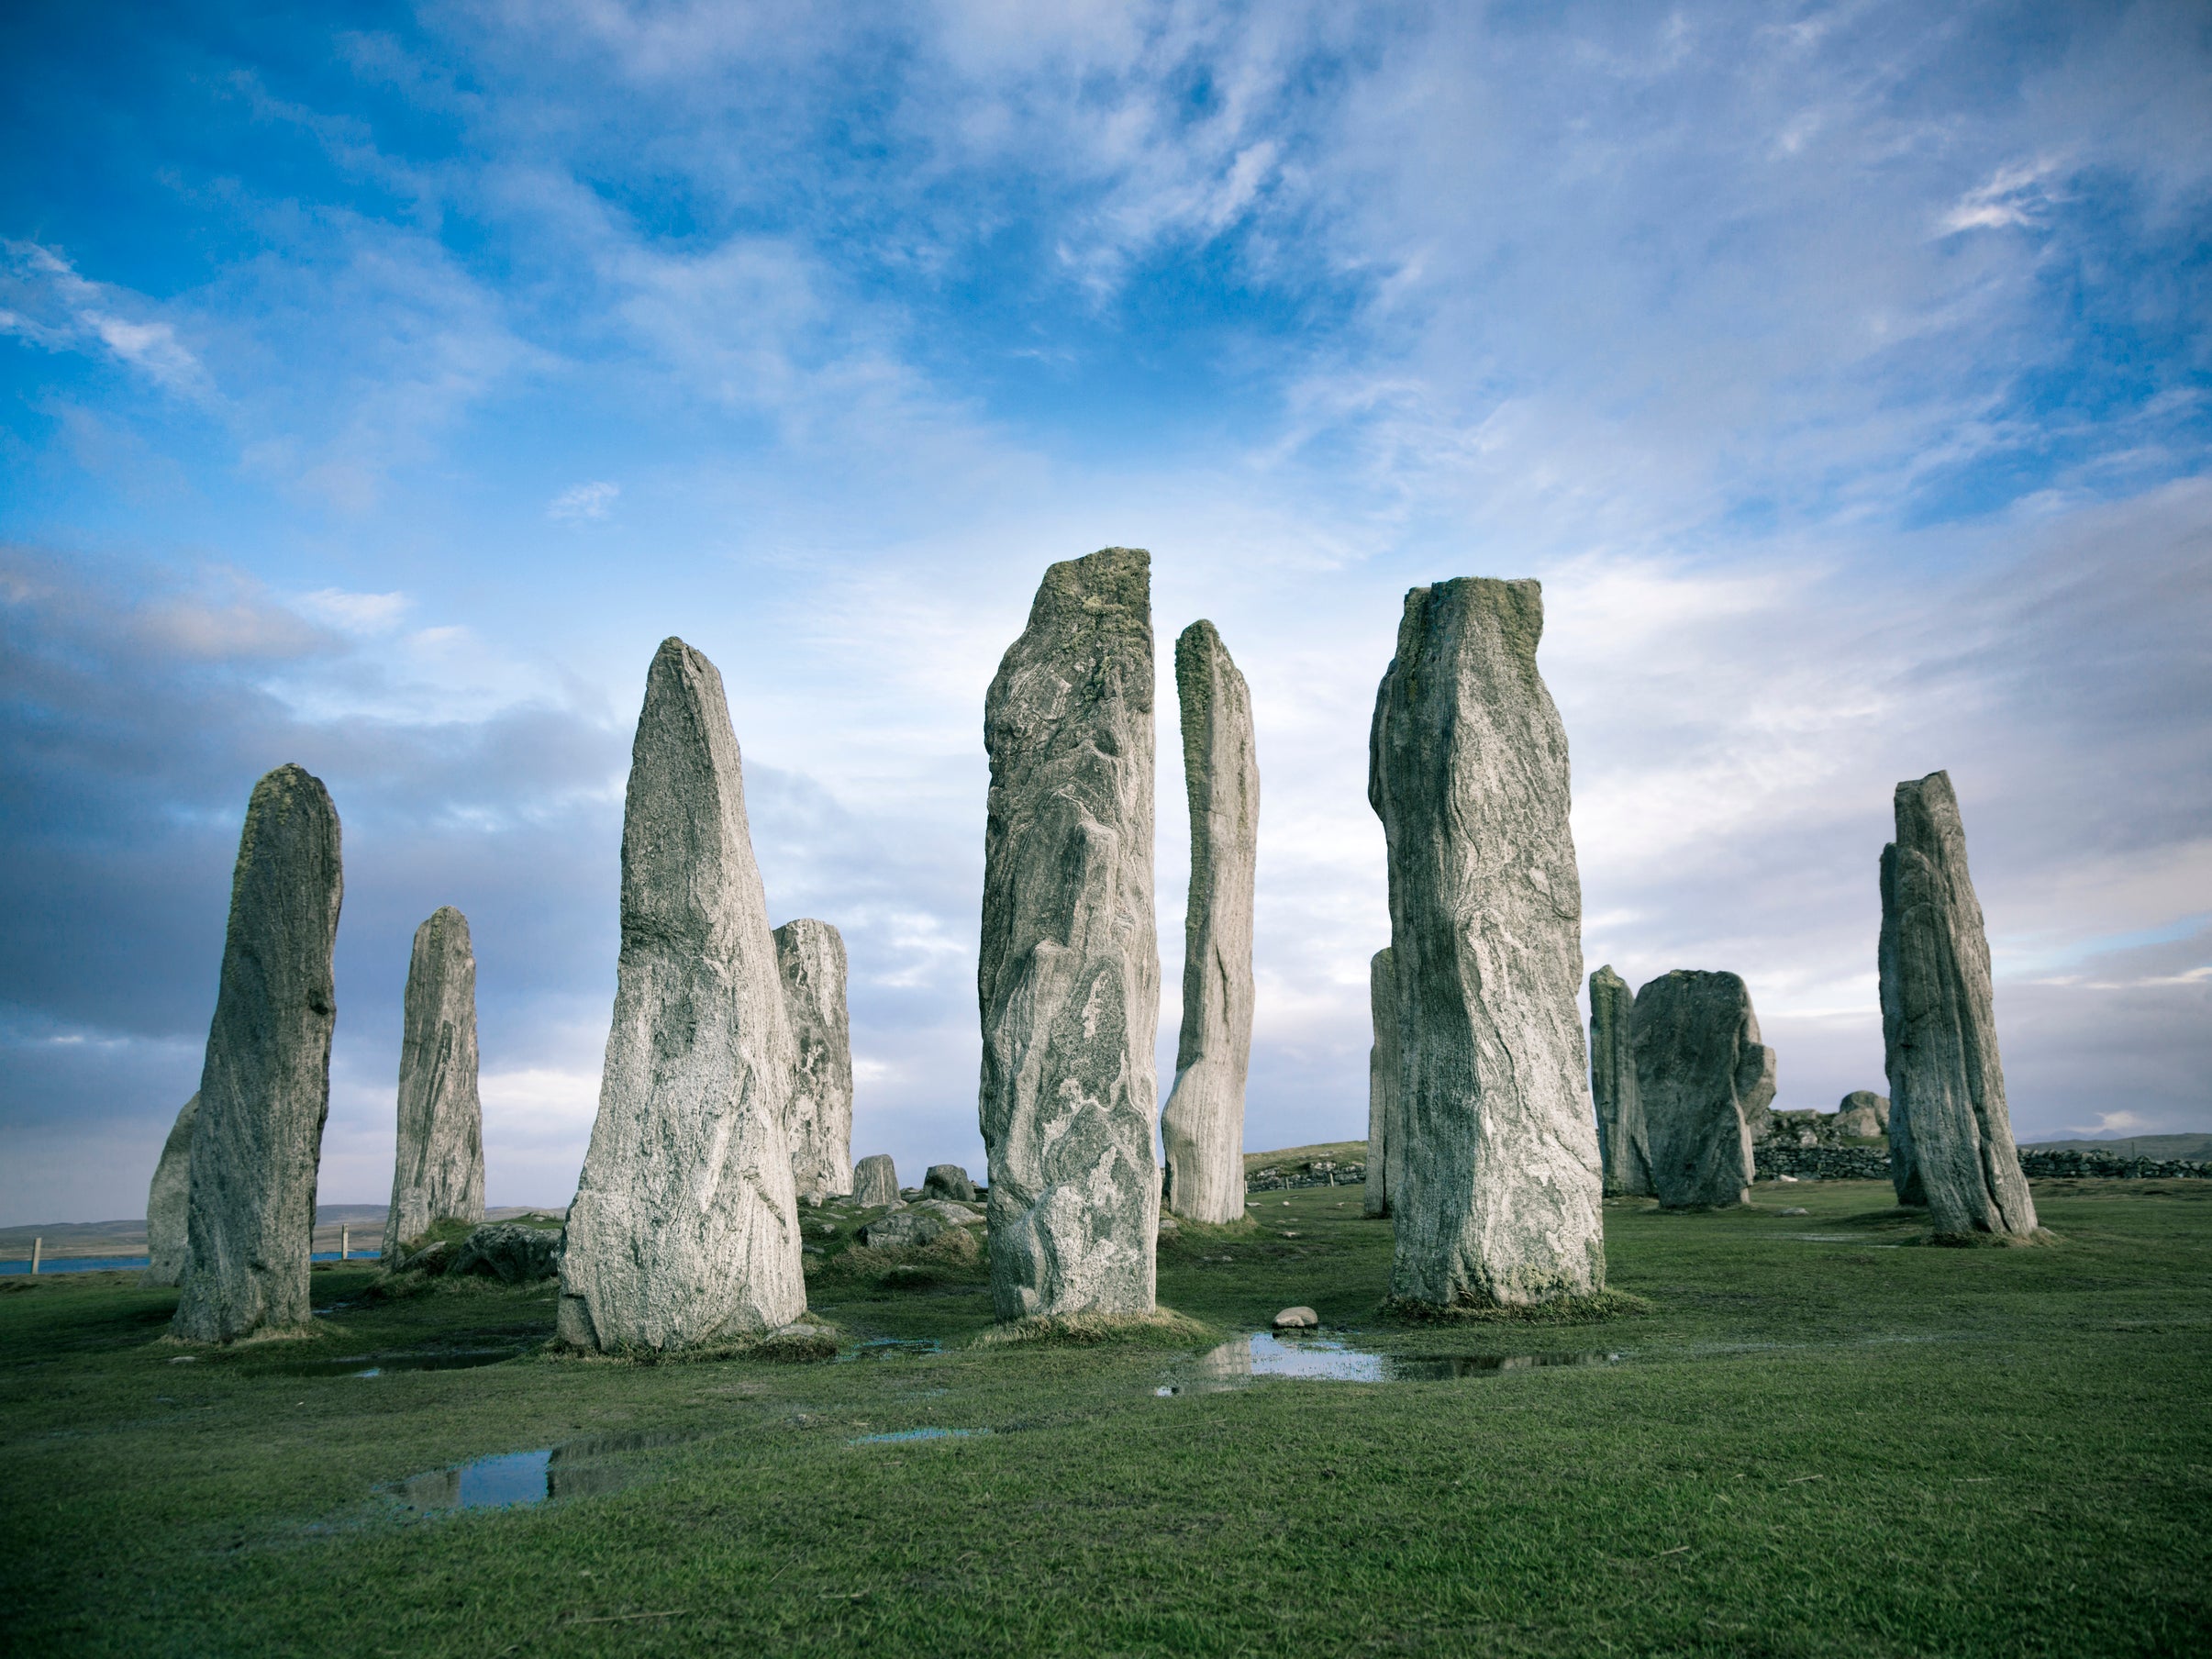 Callanish is like Stonehenge without the crowds